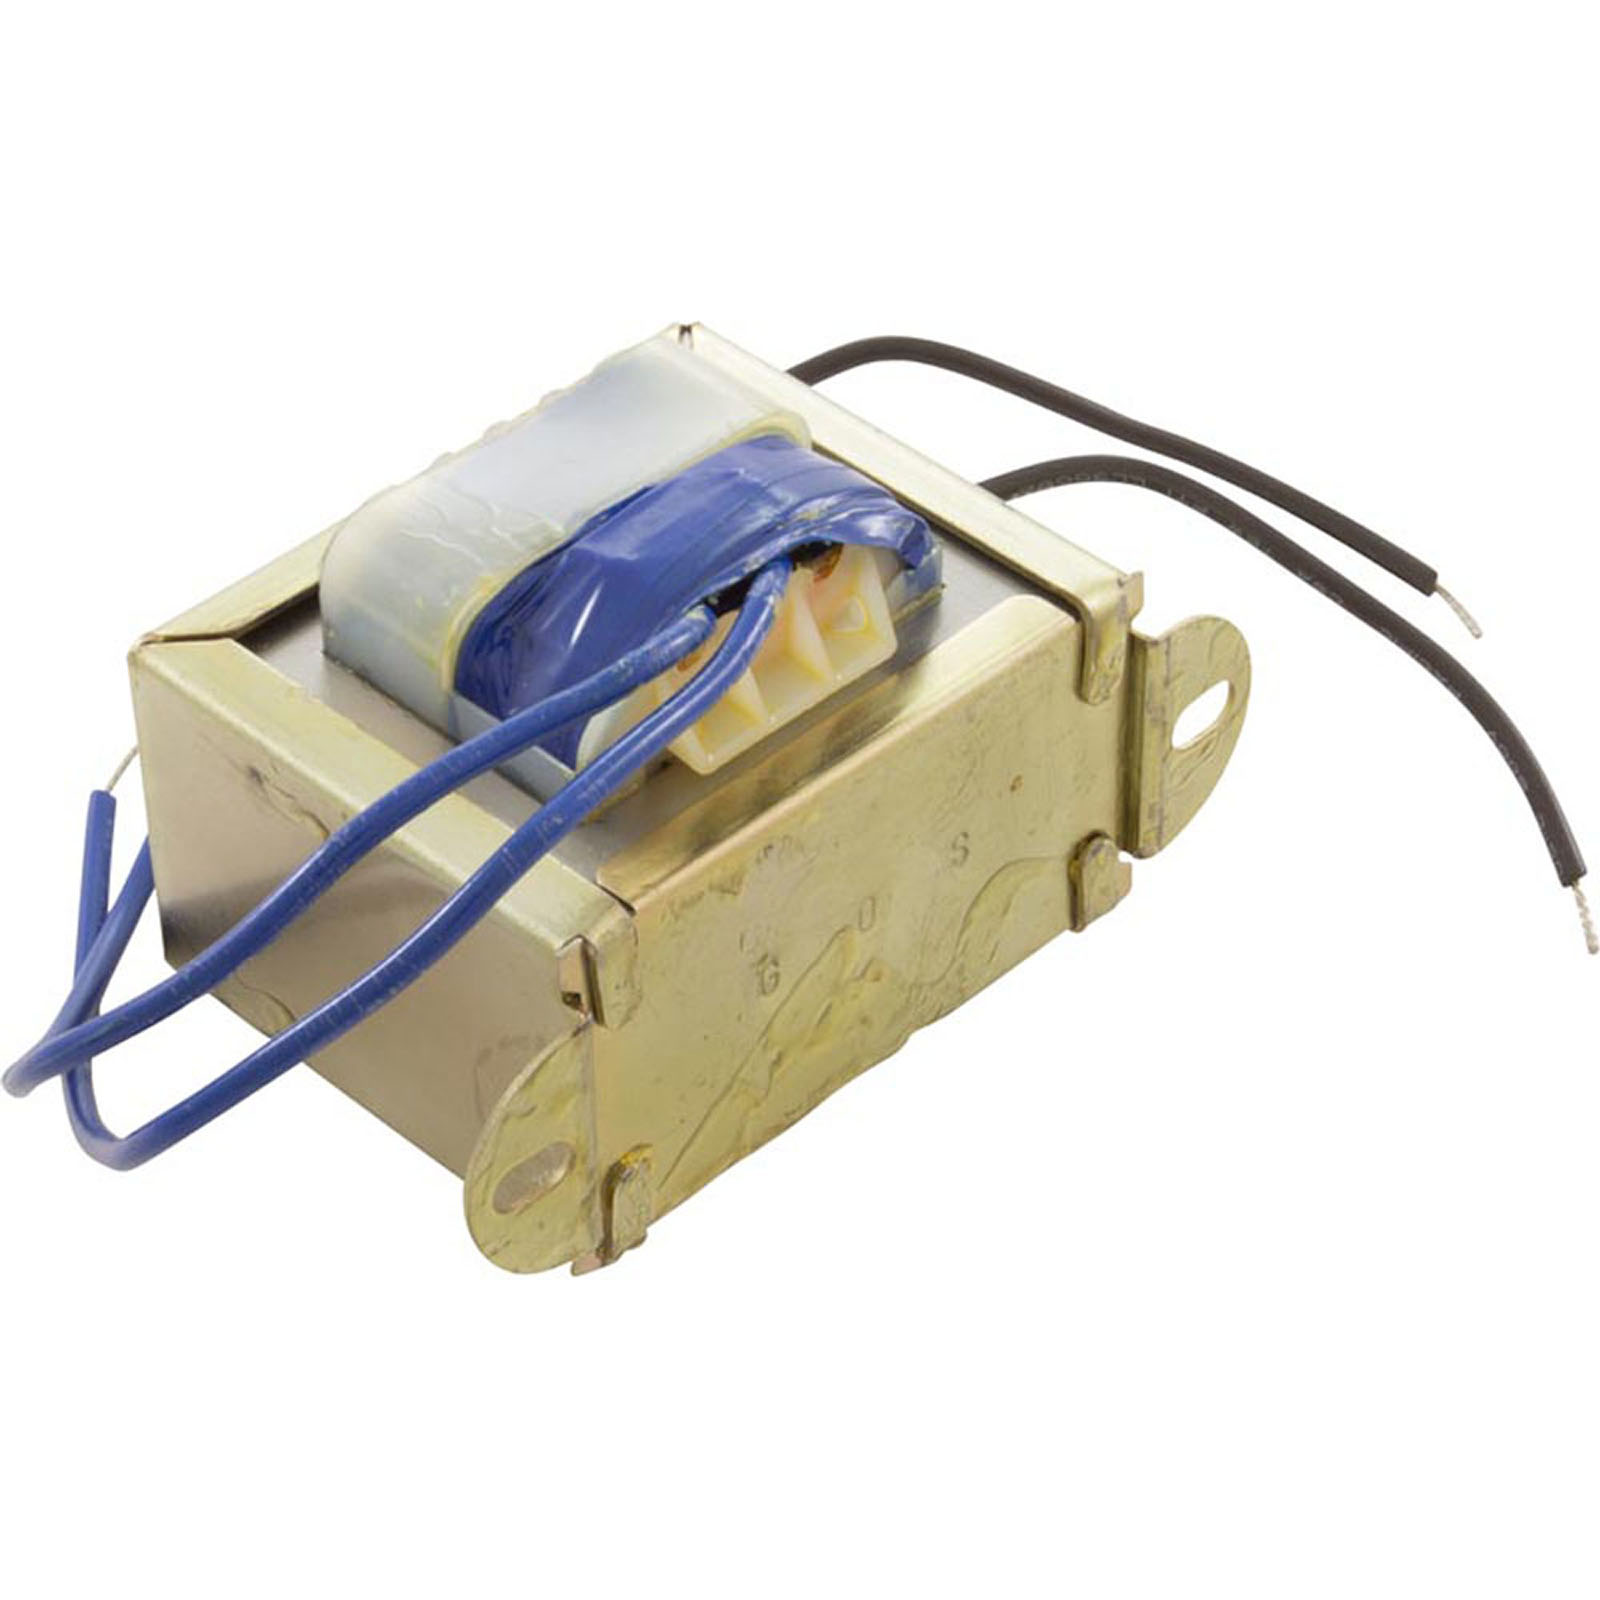 Therm Products Transformer, 230v/12v, 2 A